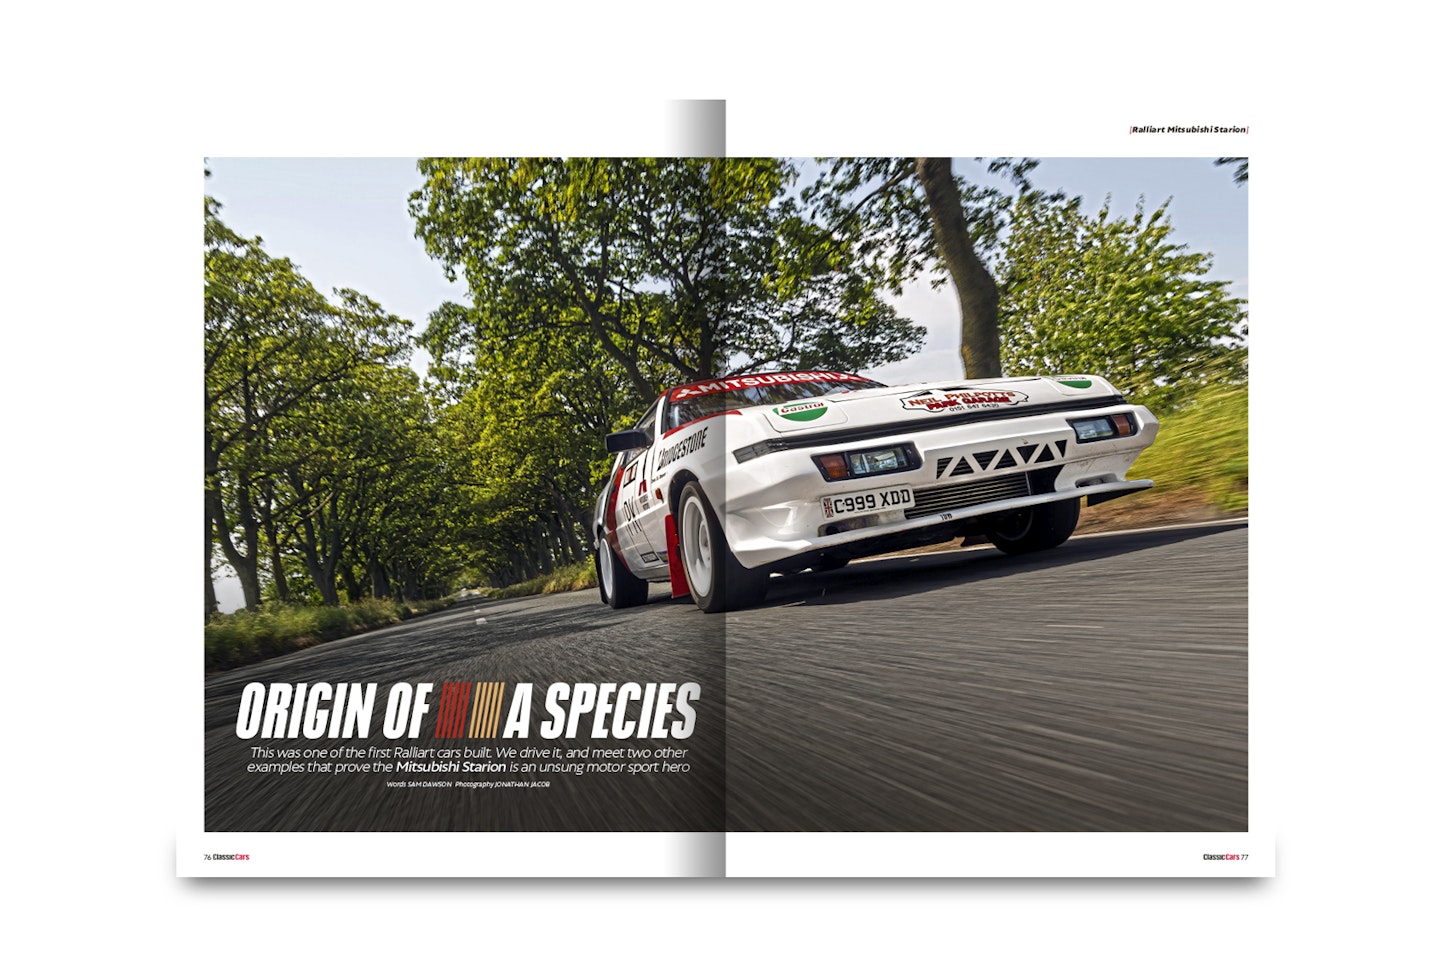 Origin Of A Species – How the Ralliart dynasty began with the Mitsubishi Starion